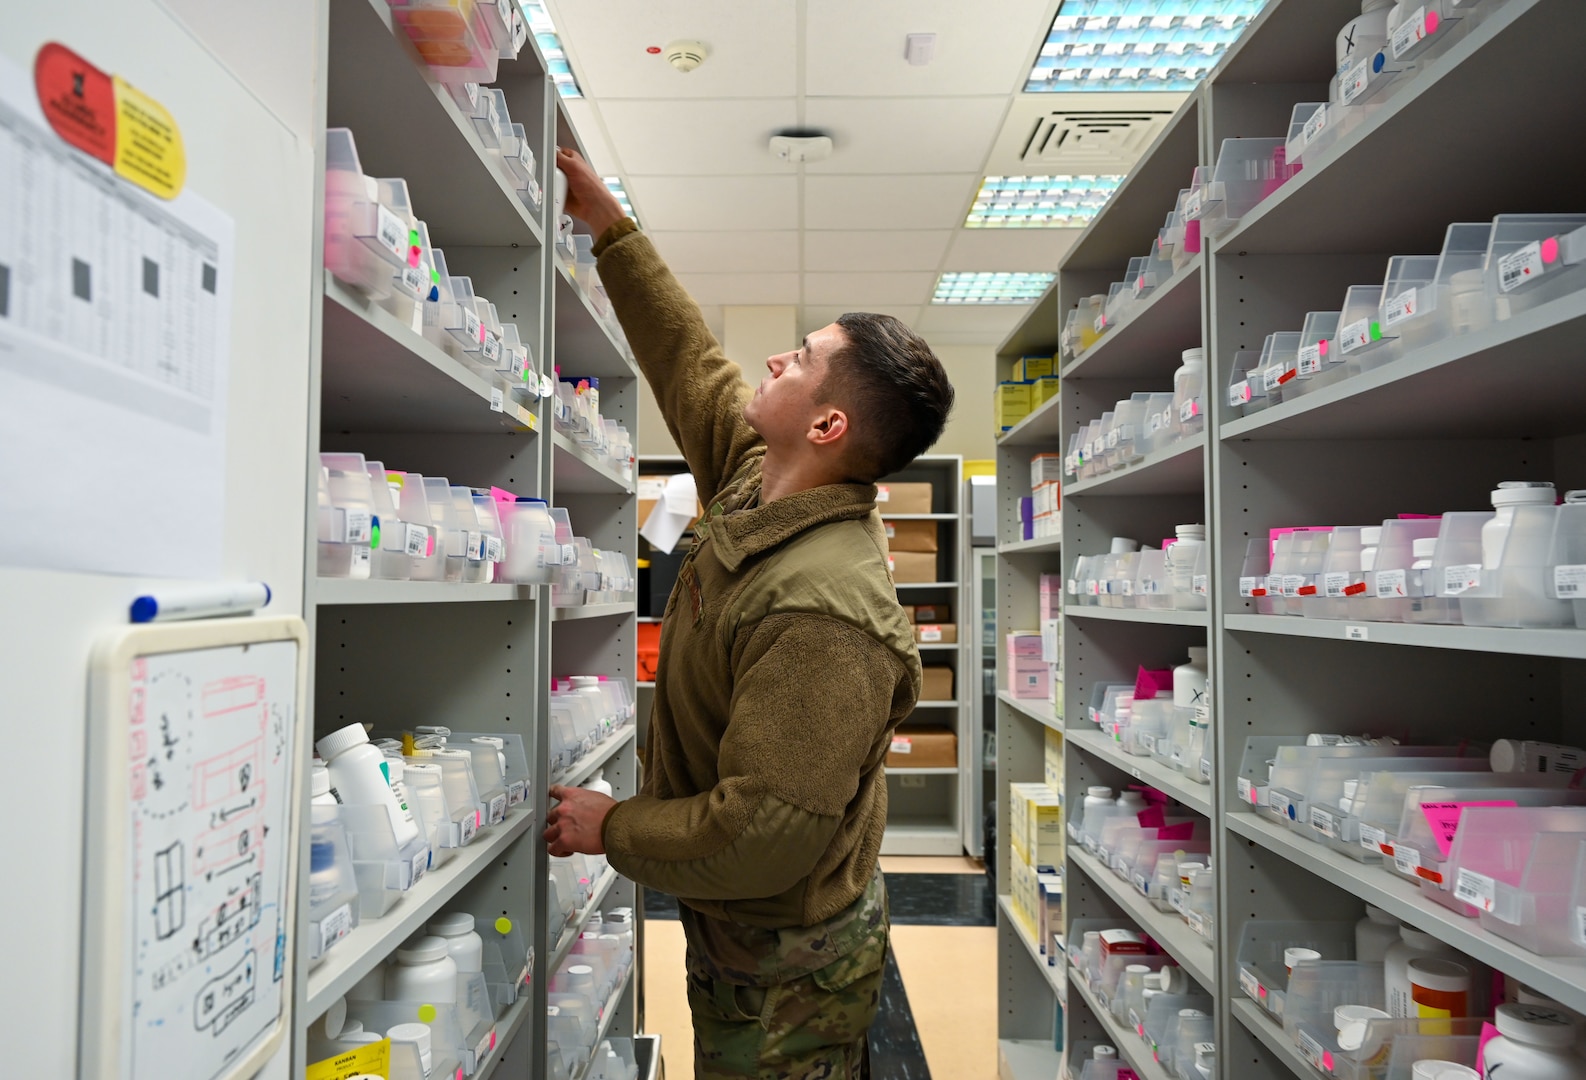 U.S. Air Force Senior Airman Connor Colassaco, 52nd Medical Group pharmacy vault custodian, reaches for medication at Spangdahlem Air Base, Germany, Dec. 14, 2022. Members of the pharmacy count and label all controlled medication to ensure it is properly inventoried. (U.S. Air Force photo by Senior Airman Jessica Sanchez-Chen)